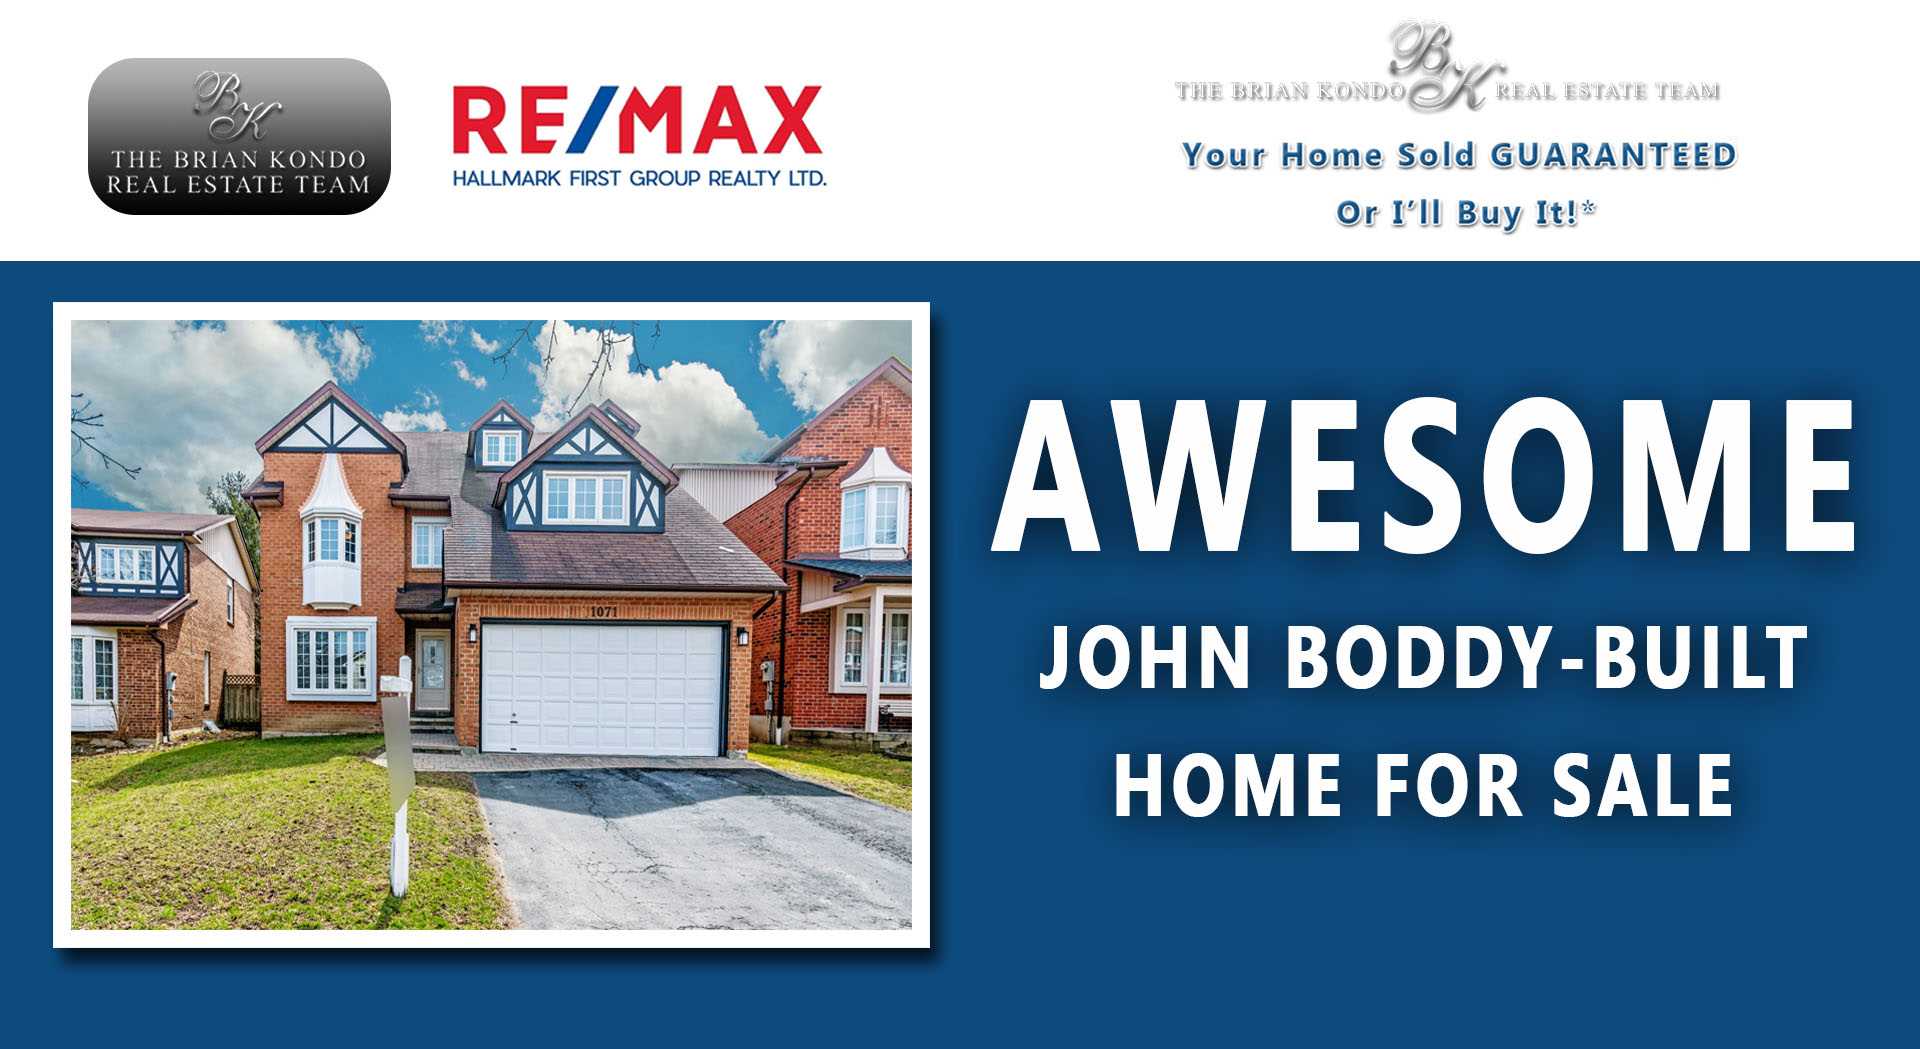 AWESOME JOHN BODDY-BUILT HOME FOR SALE | The Brian Kondo Real Estate Team